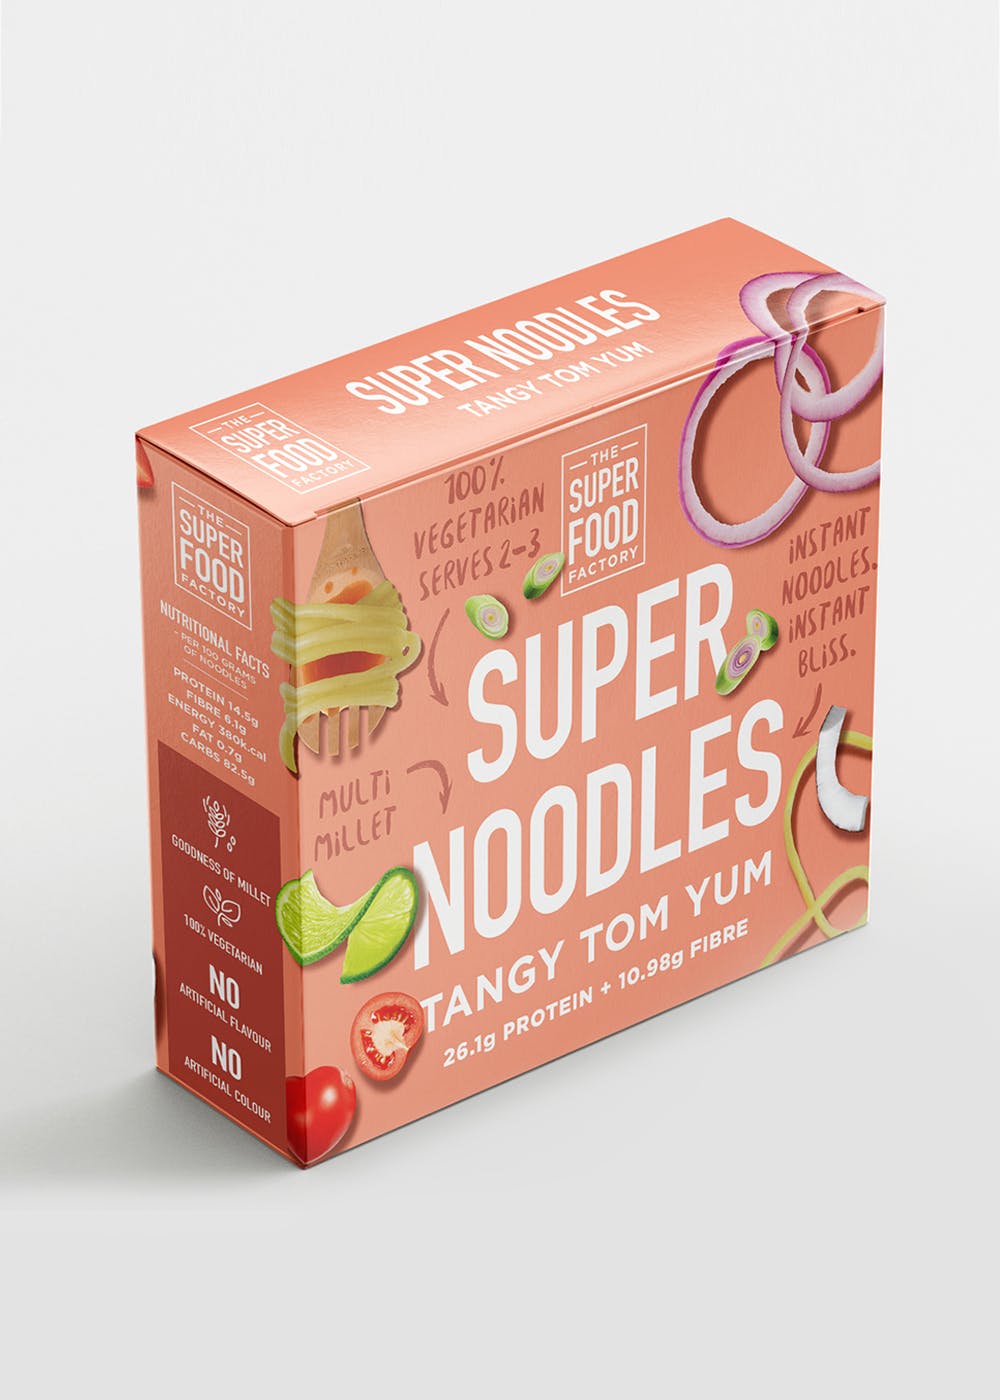 Super Noodles - Tangy Tom Yum (207gm)